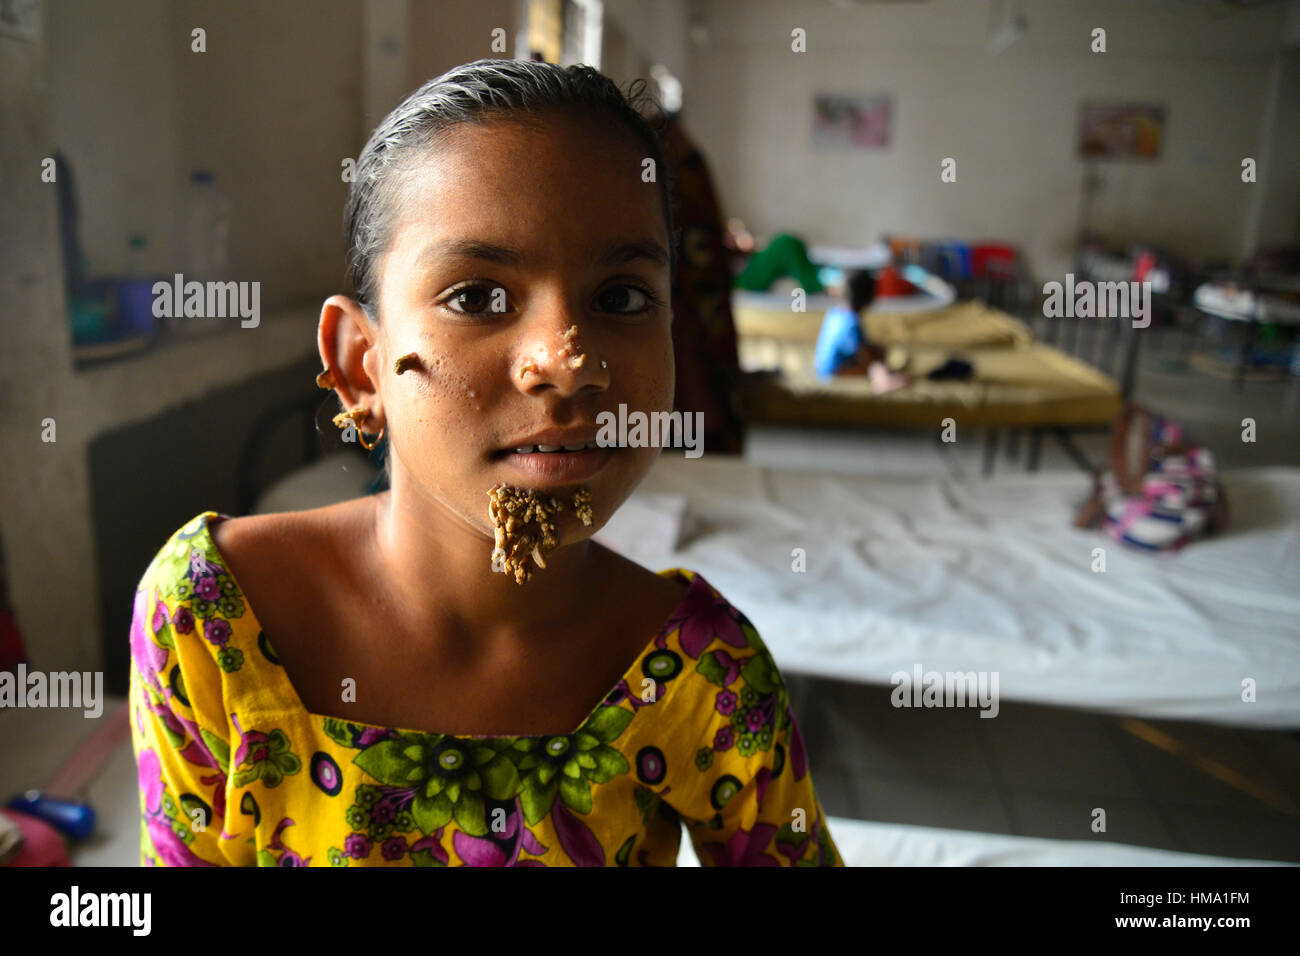 Dhaka, Bangladesh. 1st Feb, 2017. Bangladeshi patient Sahana Khatun, 10, poses for a photograph at the Dhaka Medical College and Hospital. On February 1, 2017 A young Bangladeshi girl with bark-like warts growing on her face could be the first female ever afflicted by so-called 'tree man syndrome', doctors studying the rare condition said January 31. Ten-year-old Sahana Khatun has the tell-tale gnarled growths sprouting from her chin, ear and nose, but doctors at Dhaka's Medical College Hospital are still conducting tests to establish if she has the unusual skin disorder. Credit: Mamunur Rashi Stock Photo